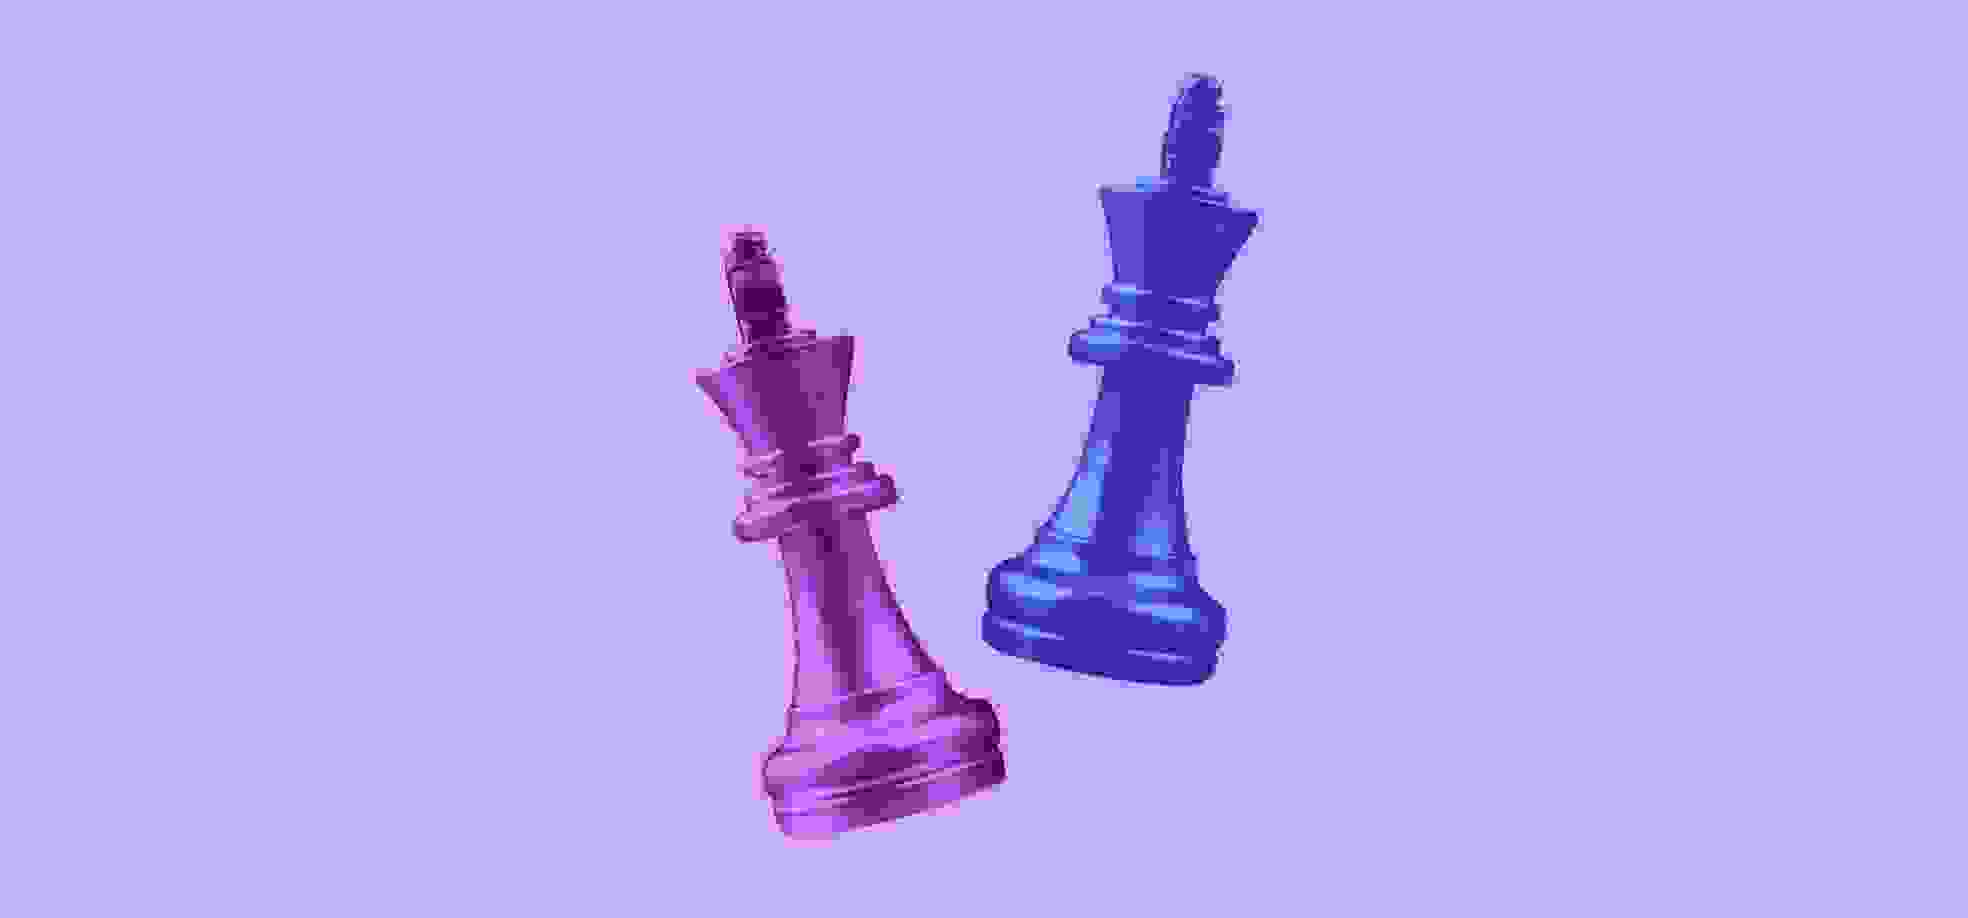 chess king and queen figure illustrations on a purple background